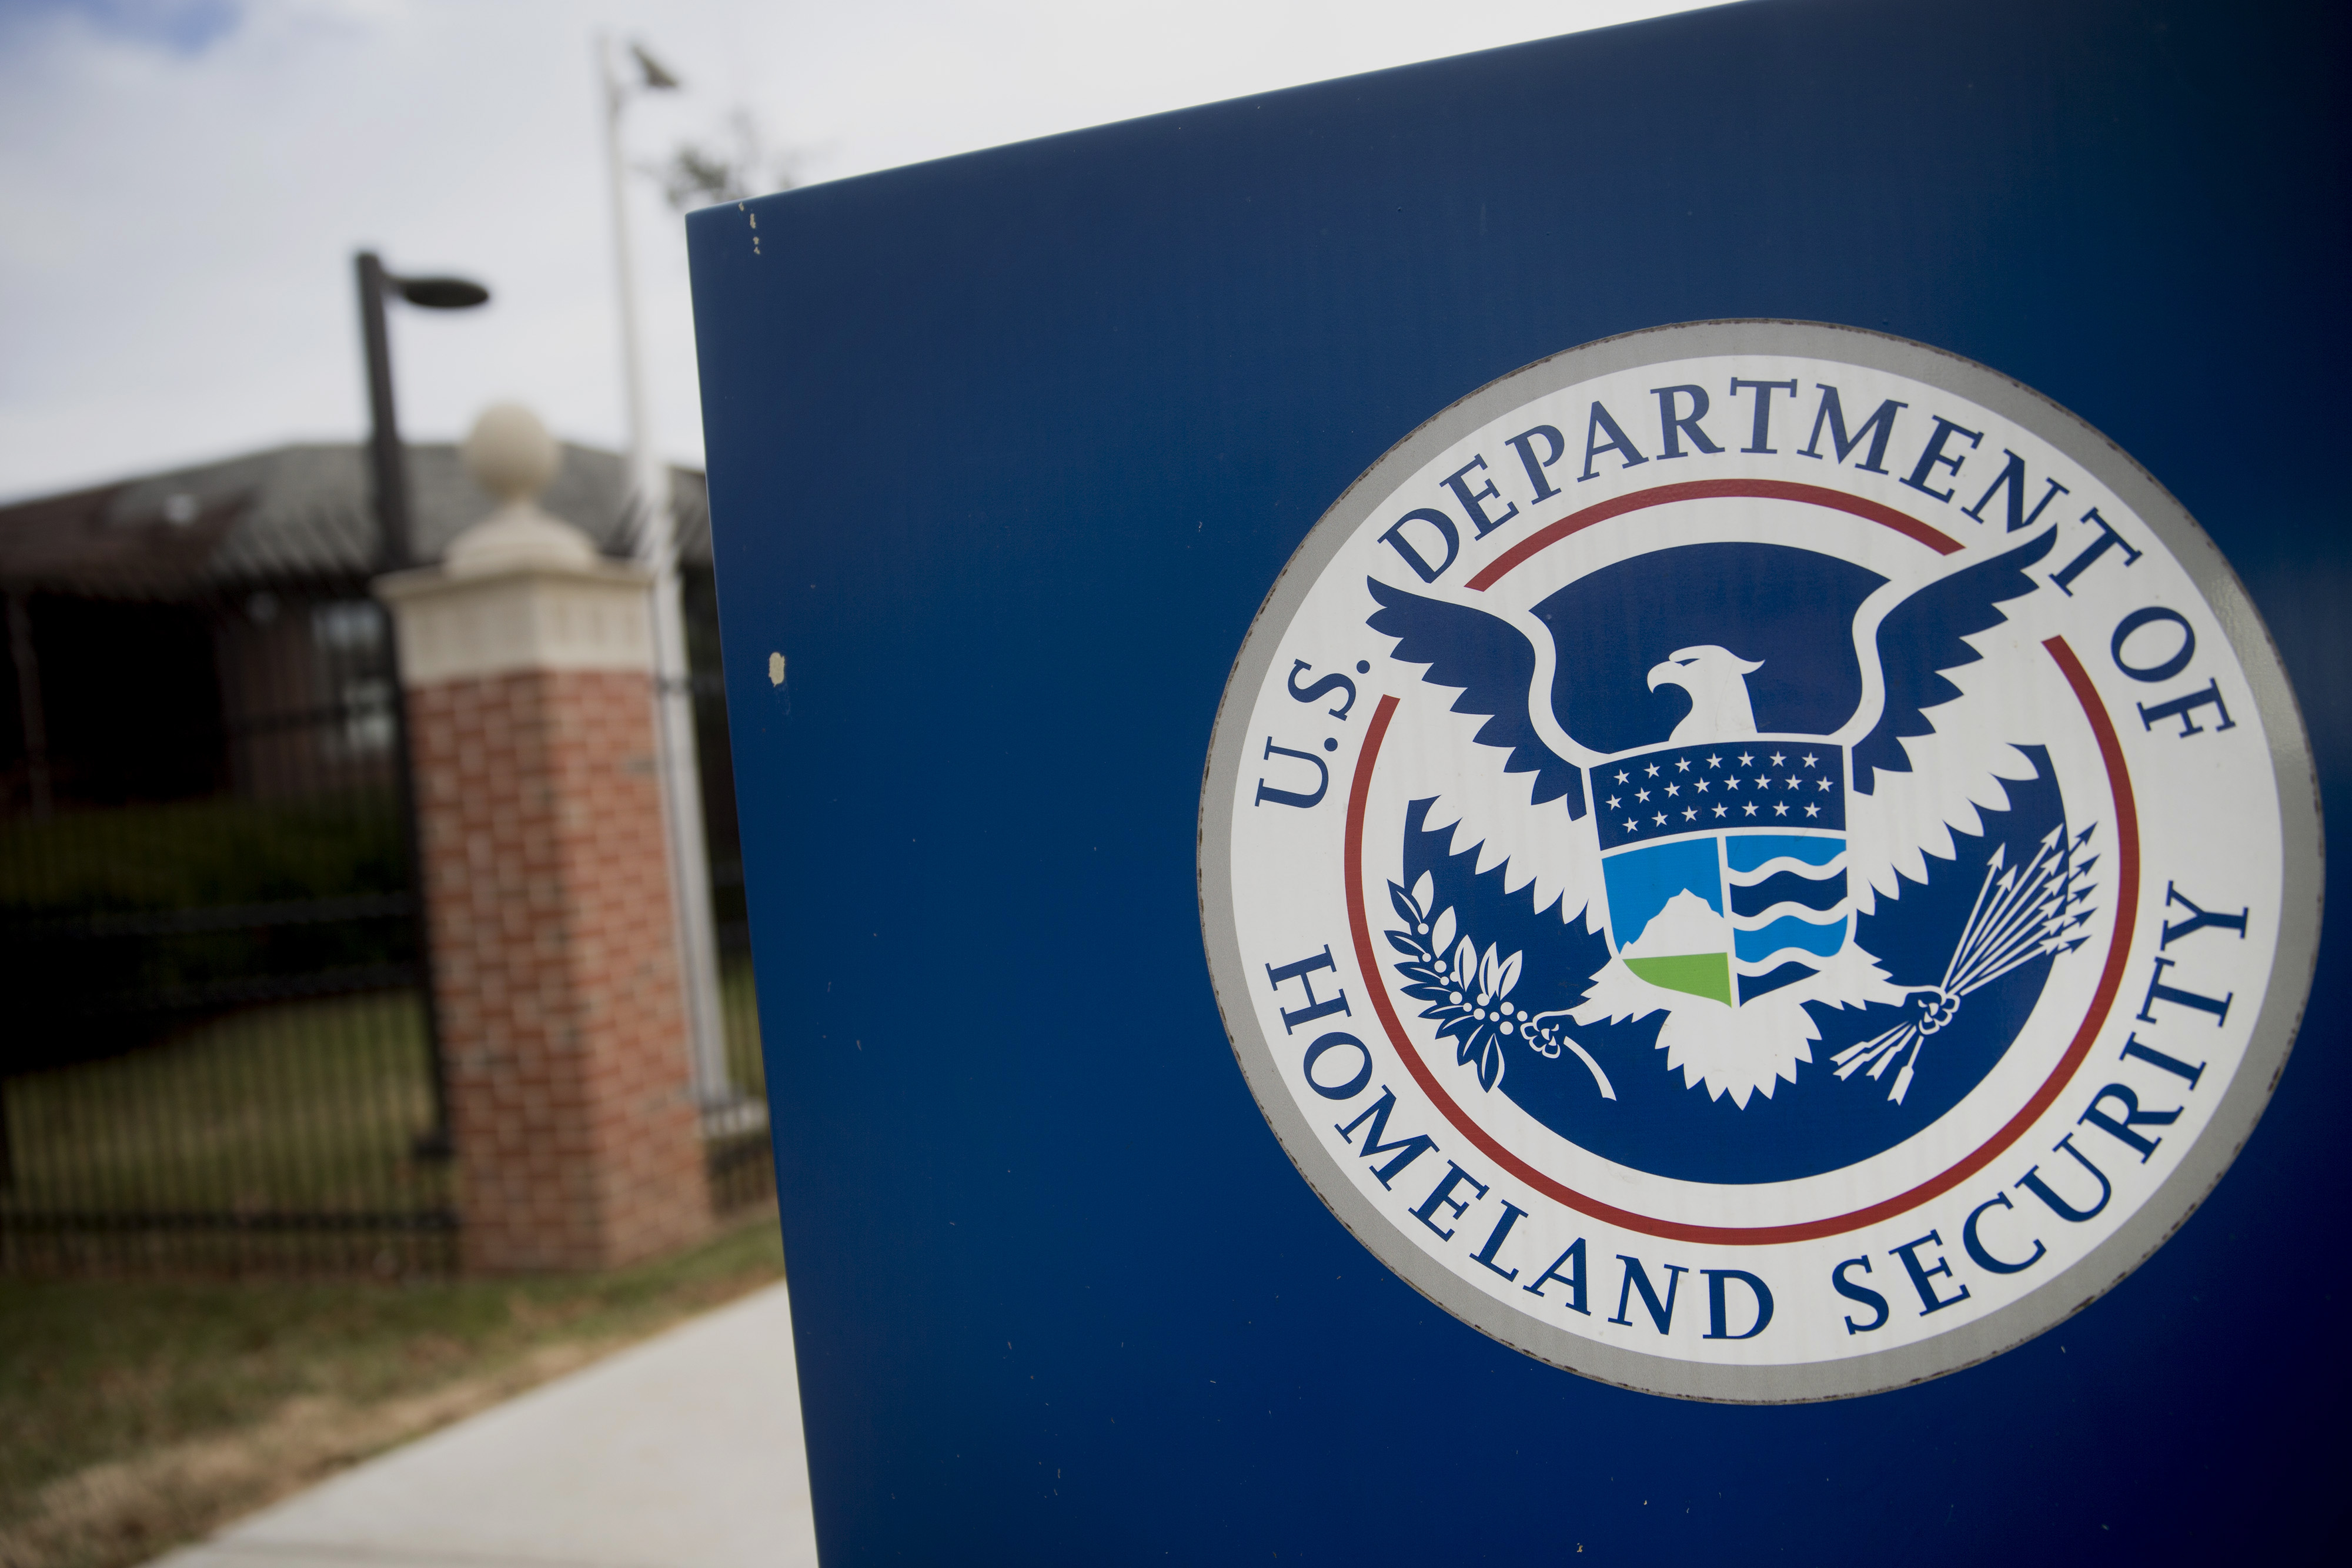 The U.S. Department of Homeland Security (DHS) seal stands at the agency's headquarters in Washington, D.C., U.S., on Thursday, Dec. 11, 2014. The U.S. House is set to pass a $1.1 trillion spending bill that includes a banking provision opposed by many Democrats as a giveaway to large institutions. Current funding for the government ends today, and the measure would finance most of the government through September 2015. The DHS, responsible for immigration policy, would be financed only through Feb. 27. Photographer: Andrew Harrer/Bloomberg via Getty Images (Bloomberg—Bloomberg via Getty Images)